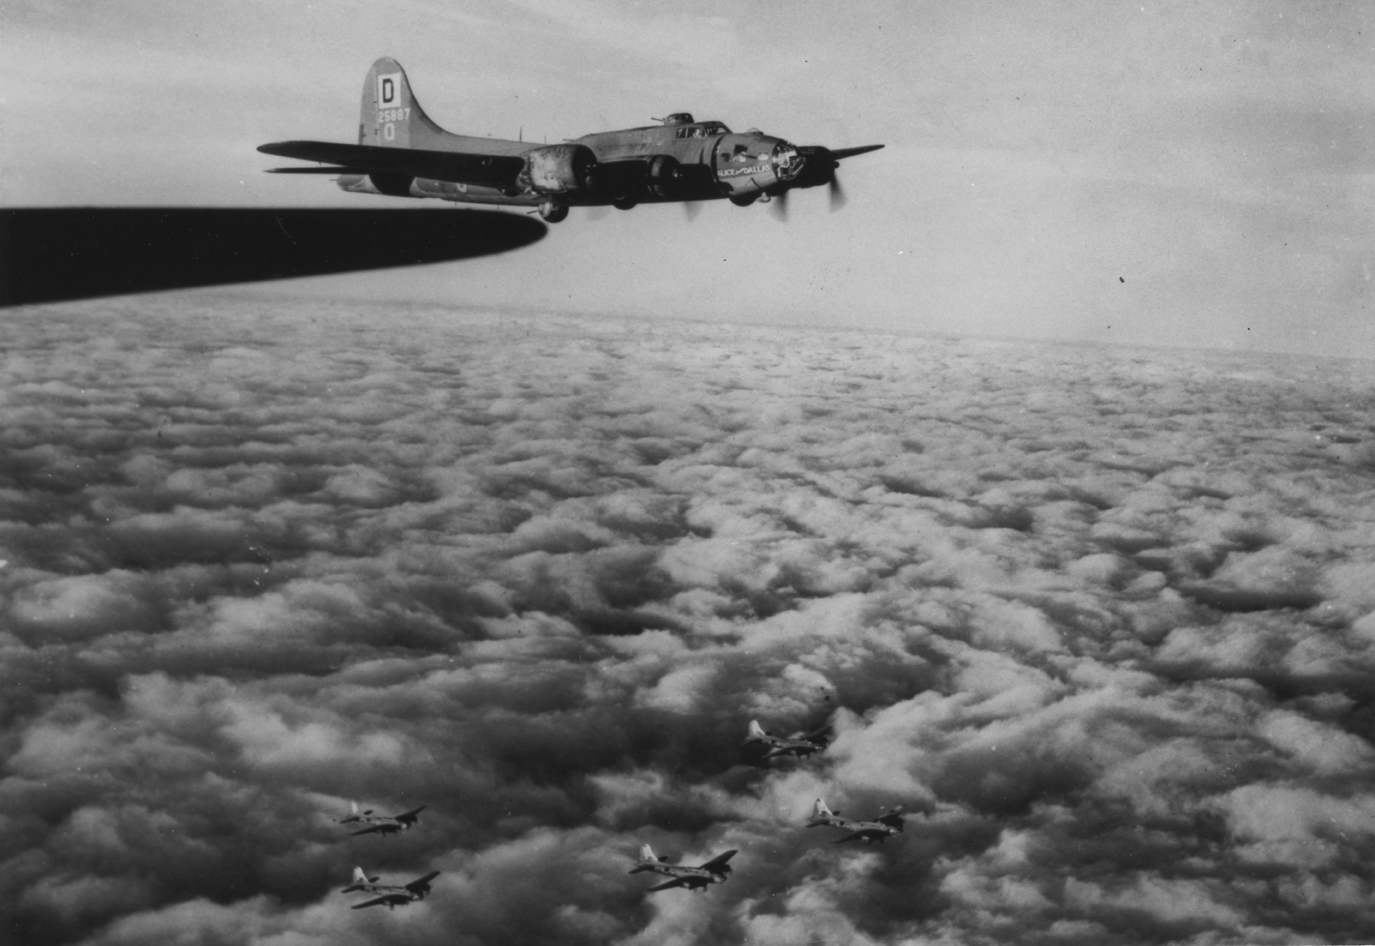 "Alice from Dallas" of the 100th Bomb Group flies in formation above the clouds. (Roger Freeman Collection, American Air Museum in Britain)